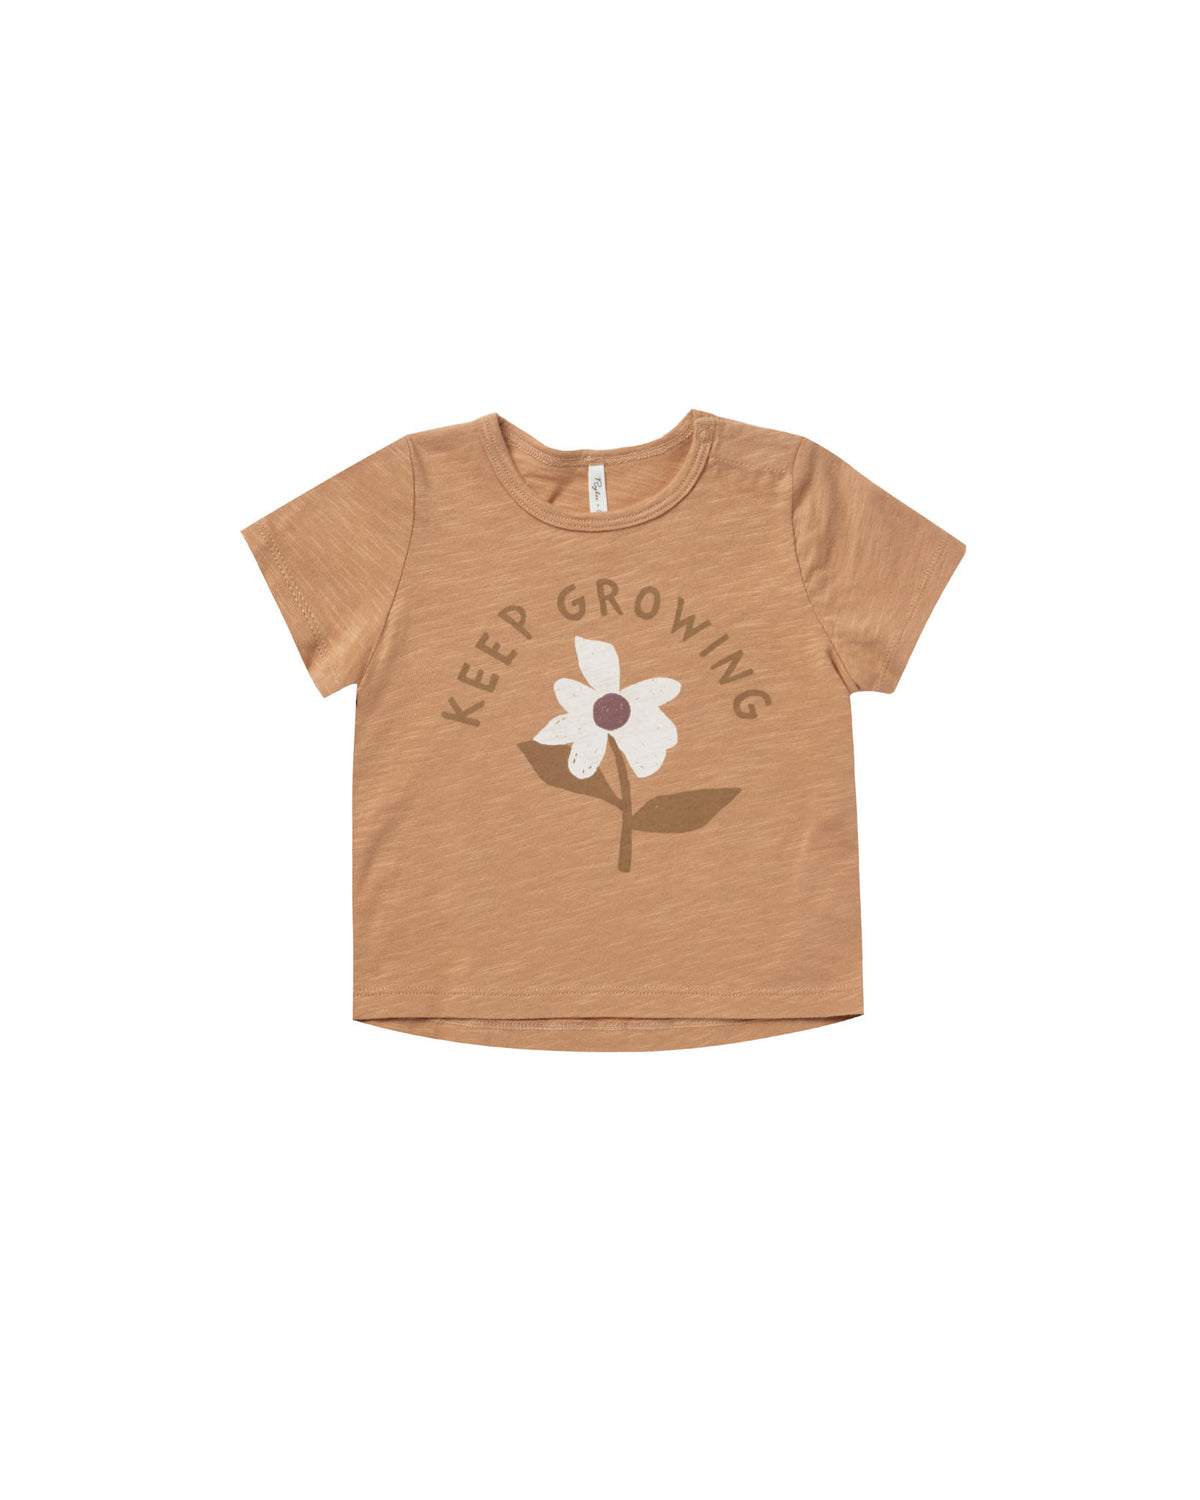 Basic Tee - Keep Growing - Child Boutique